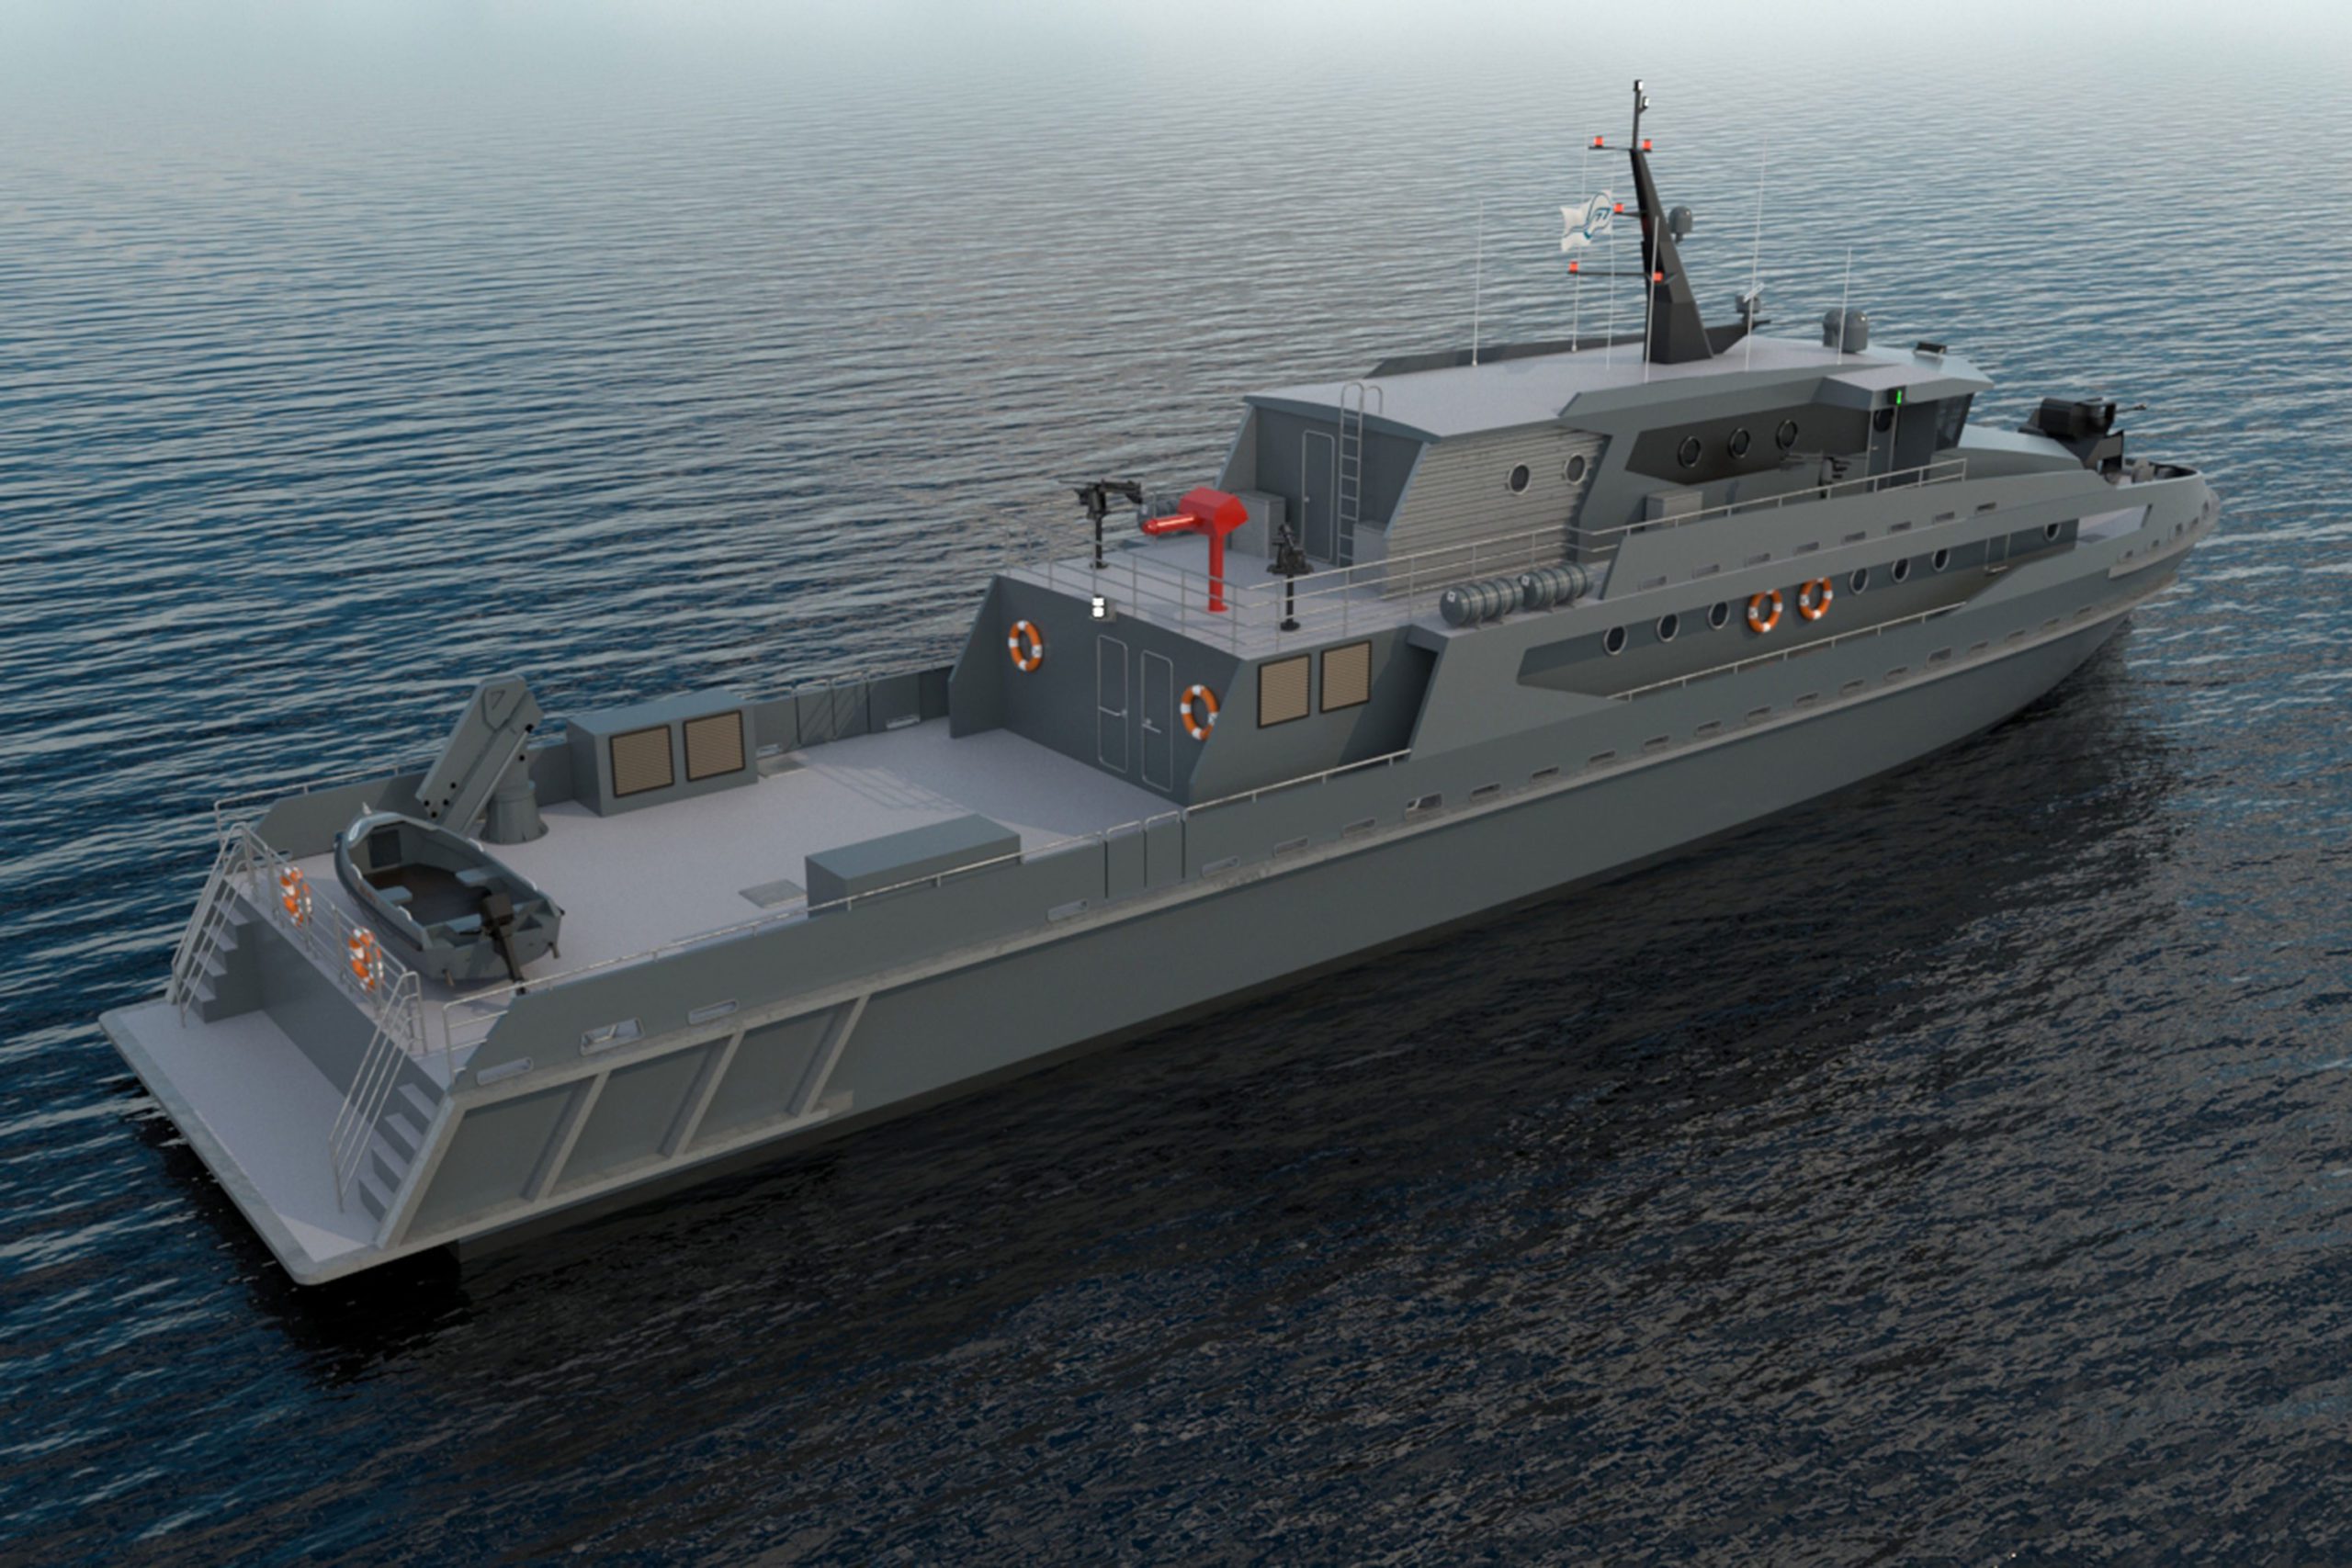 Incat Crowther 42m Patrol Boat for Thailand